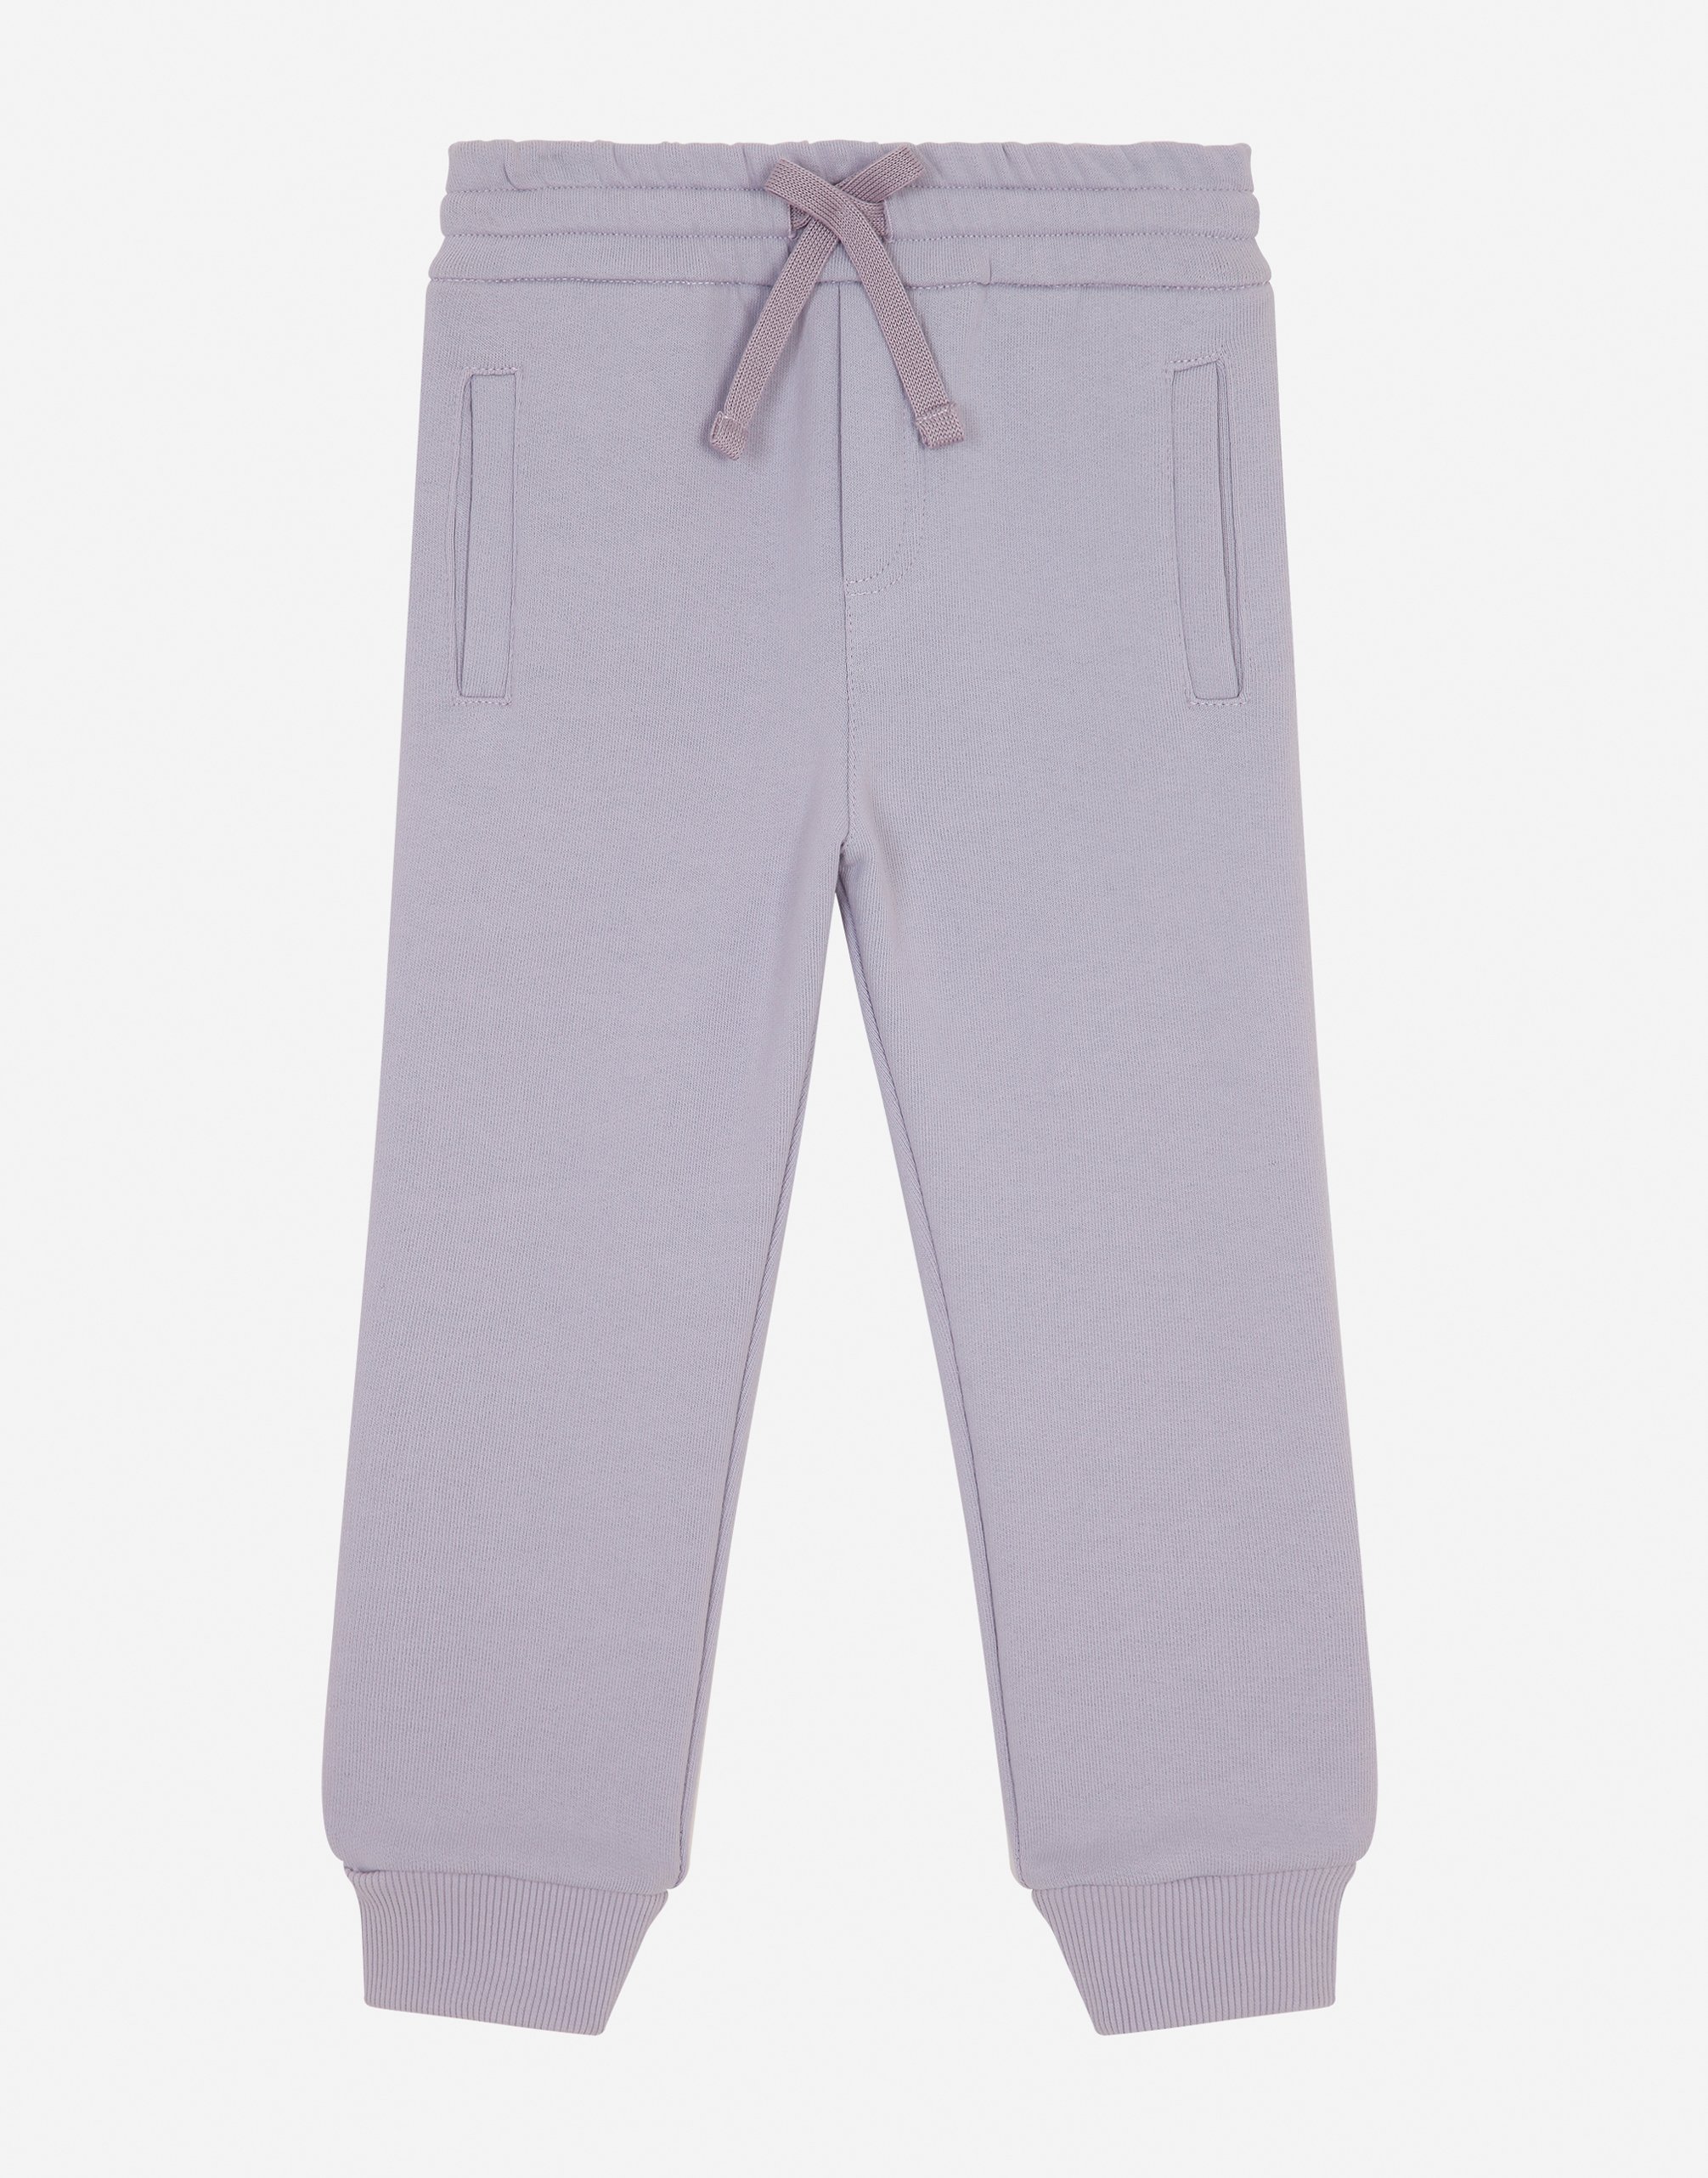 Jersey jogging pants with logo plate in Wisteria